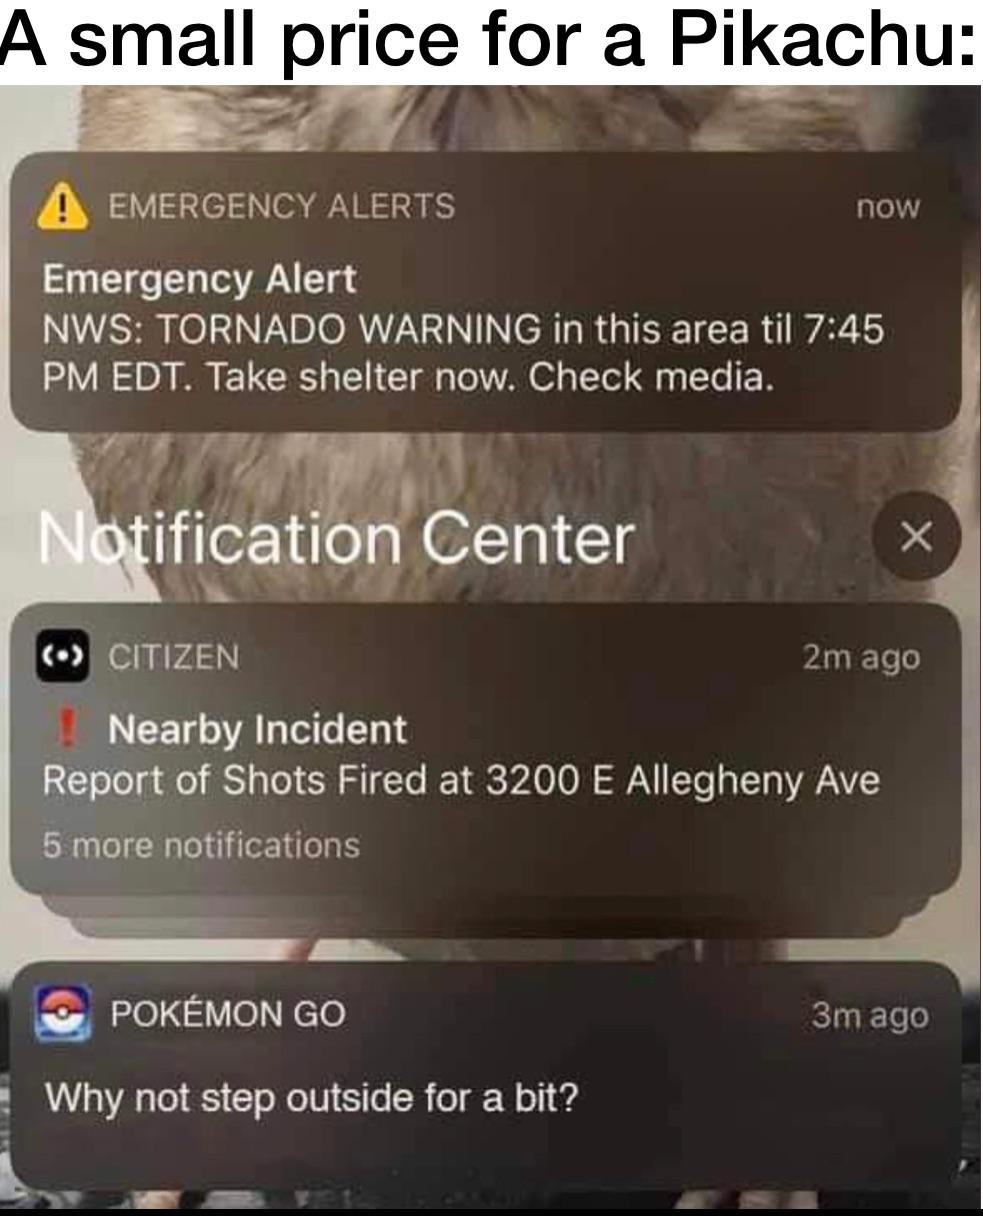 monday morning randomness - tornado shooter pokemon go - A small price for a Pikachu Emergency Alerts now Emergency Alert Nws Tornado Warning in this area til Edt. Take shelter now. Check media. Notification Center X Citizen 2m ago ! Nearby Incident Repor